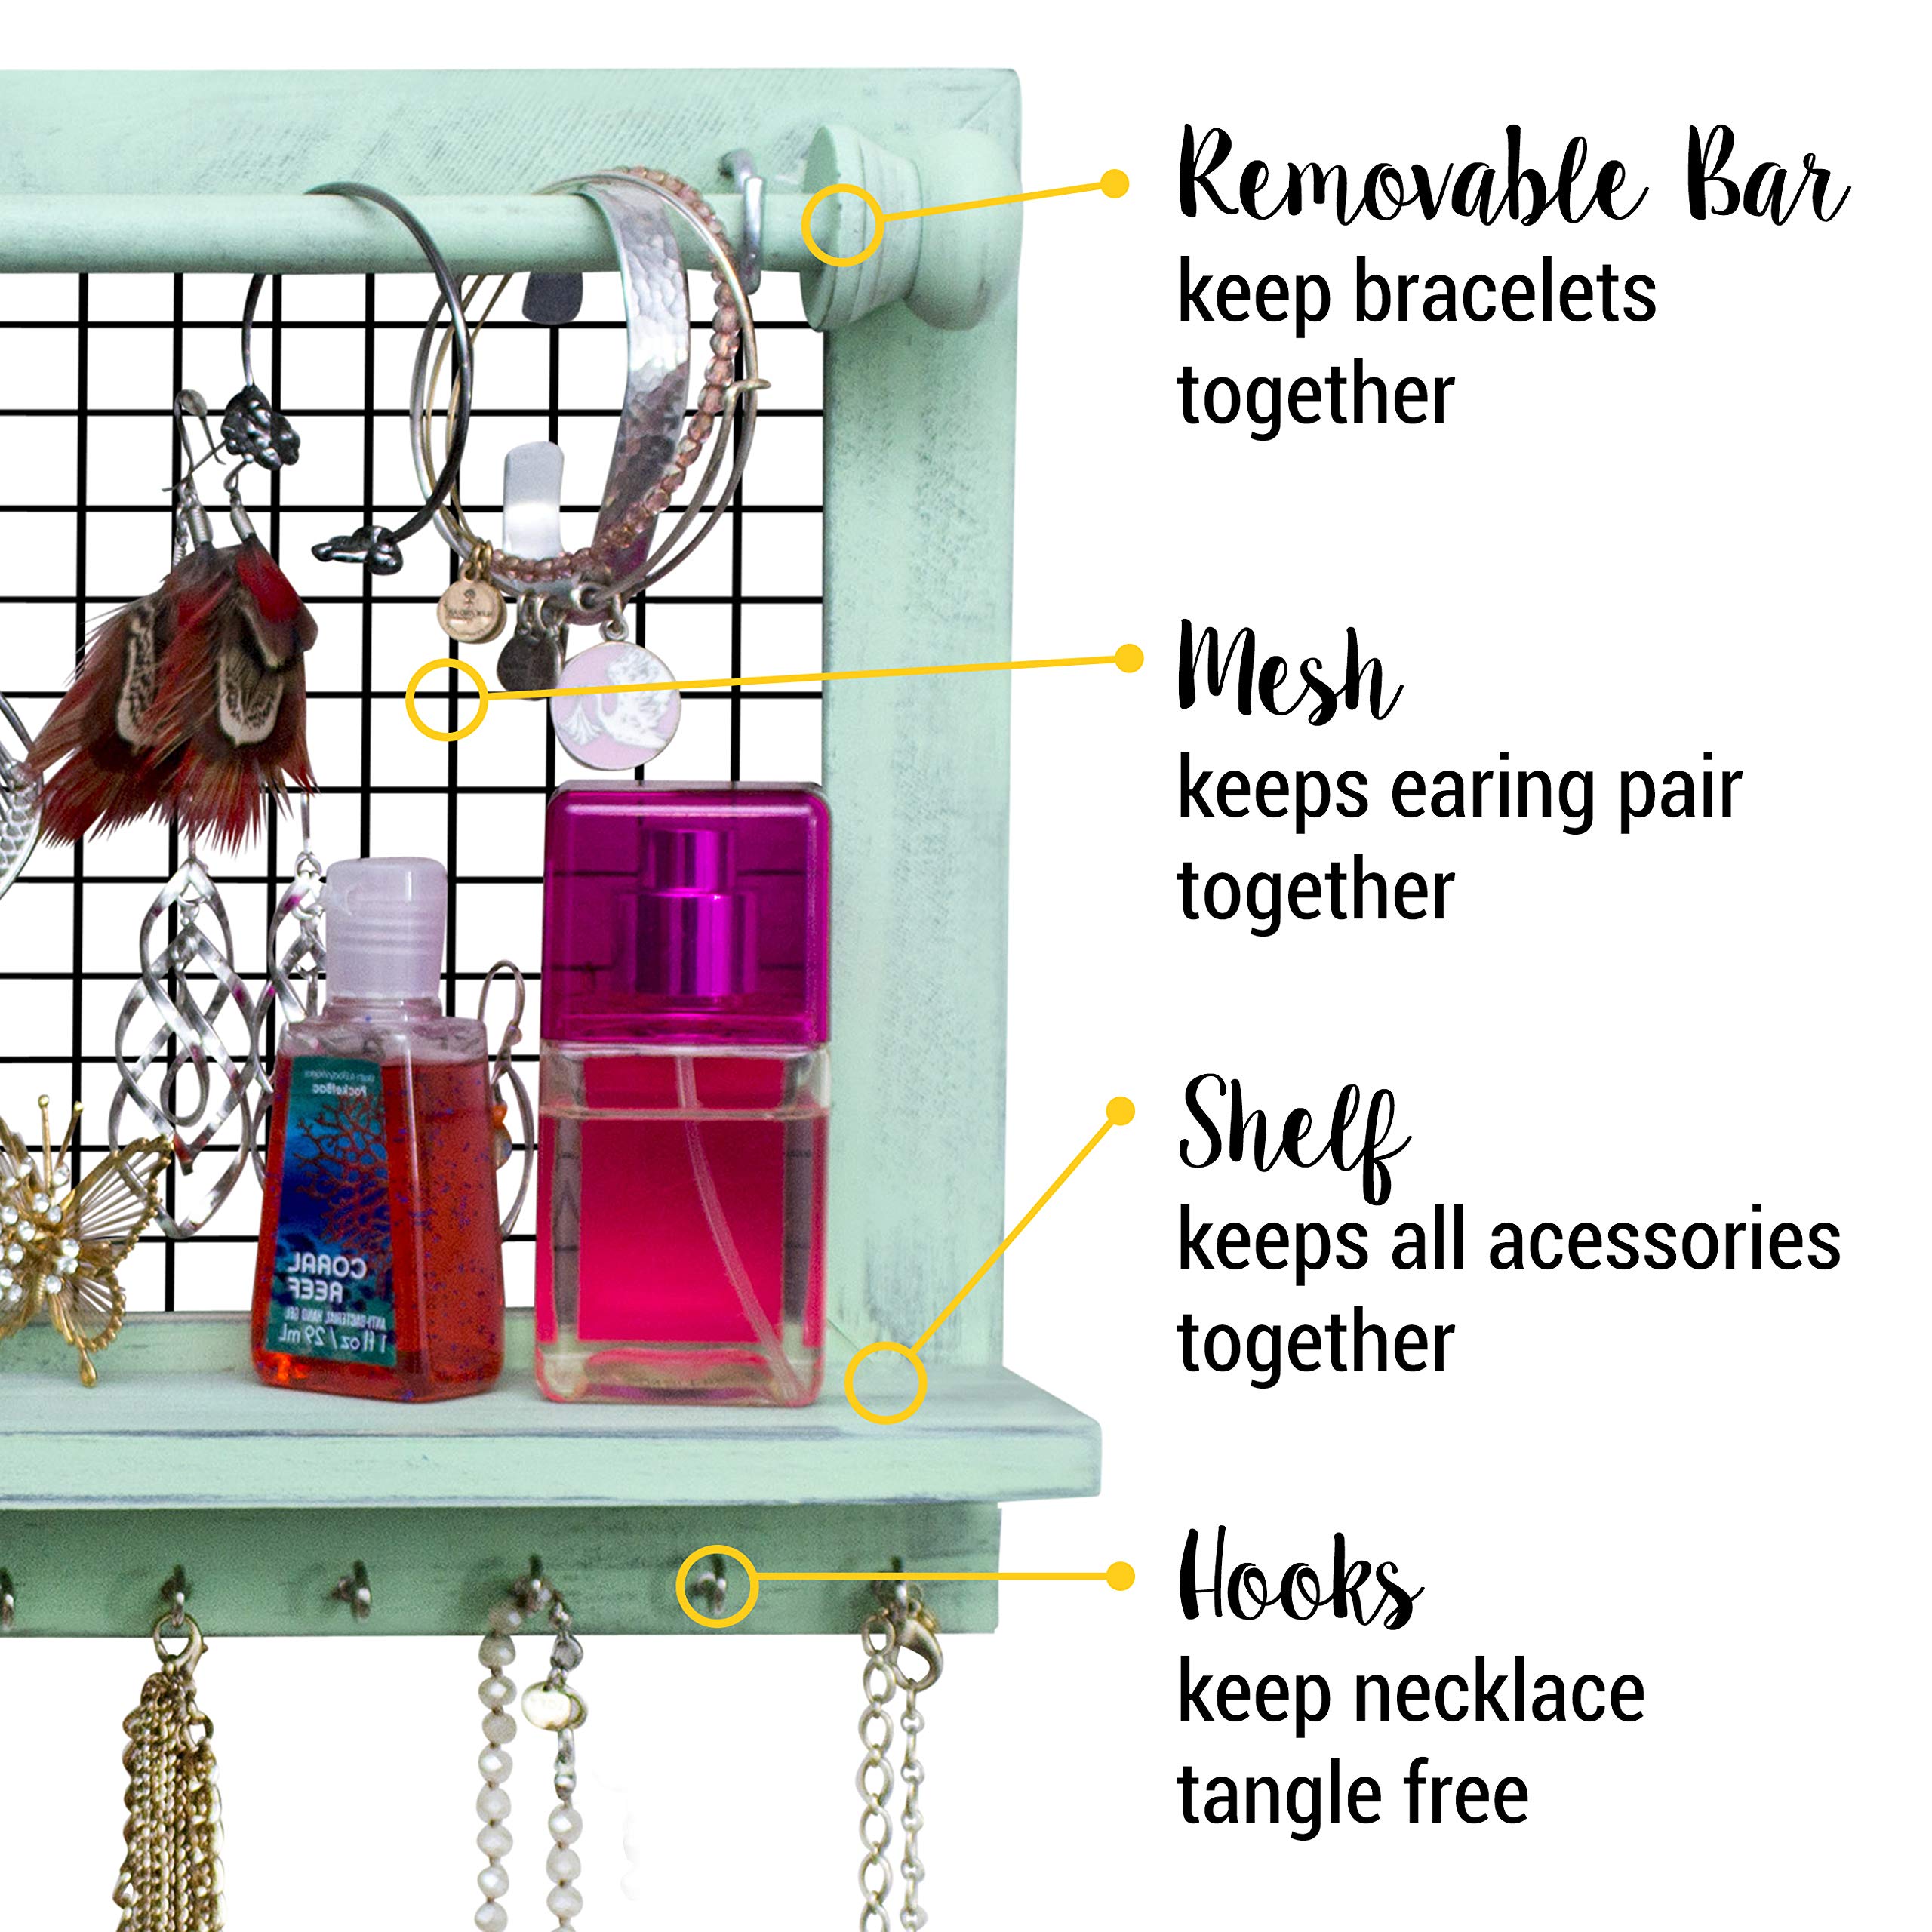 SoCal Buttercup Shabby Chic Jewelry Organizer with Removable Bracelet Rod from Wooden Wall Mounted Holder for Earrings Necklaces Bracelets and Other Accessories